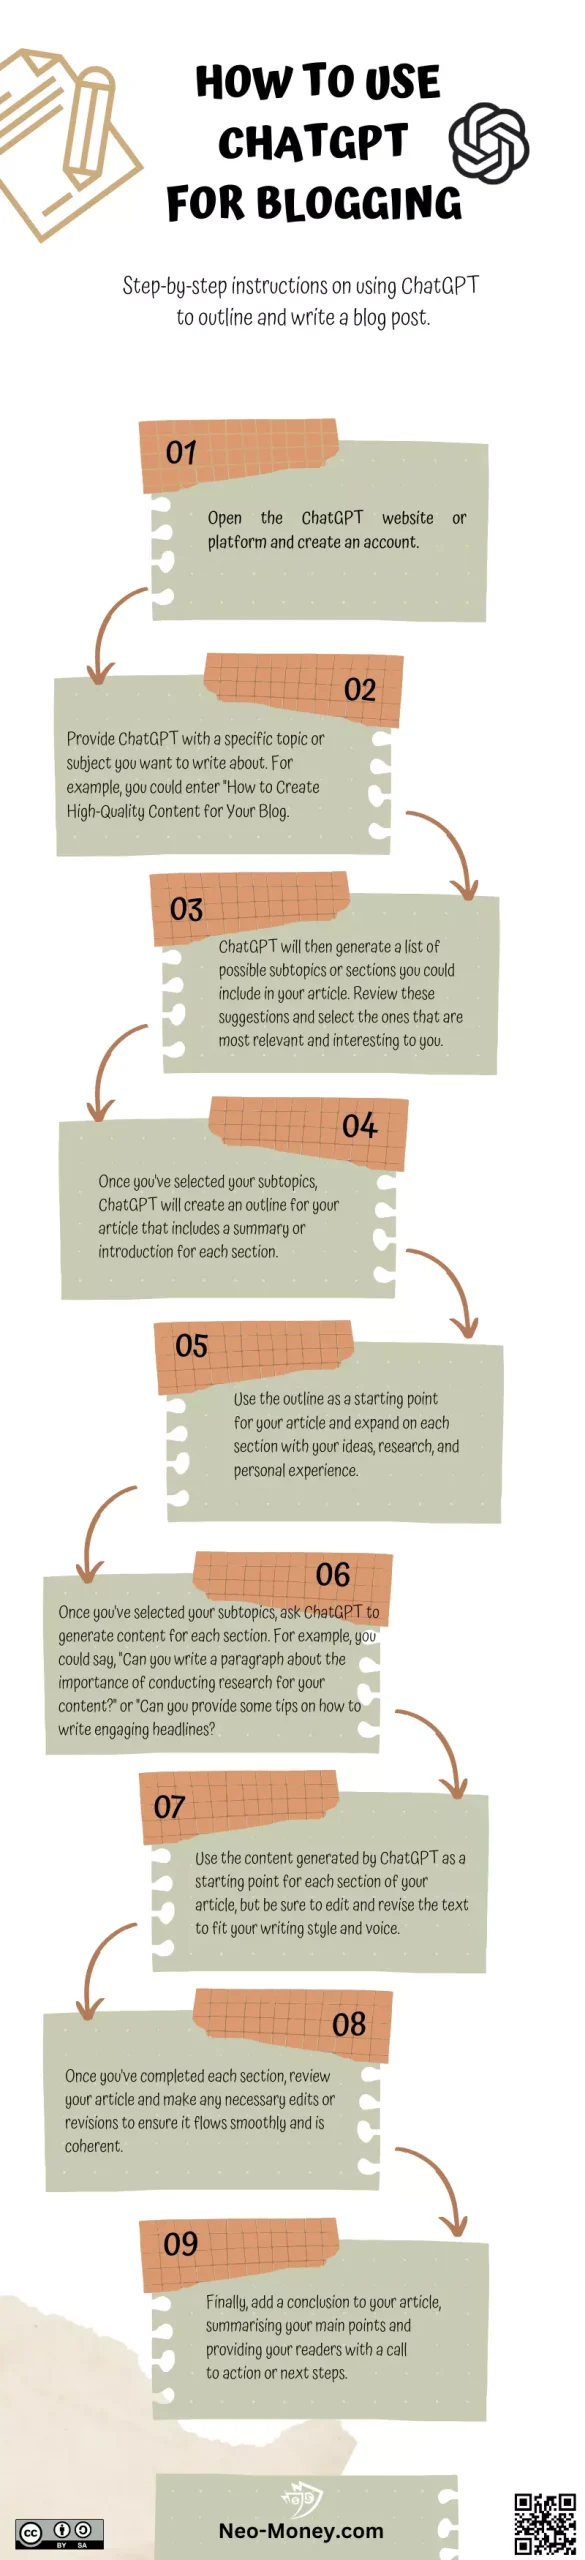 Infographic showing step-by-step for the article on How to Use ChatGPT for Blogging 2023